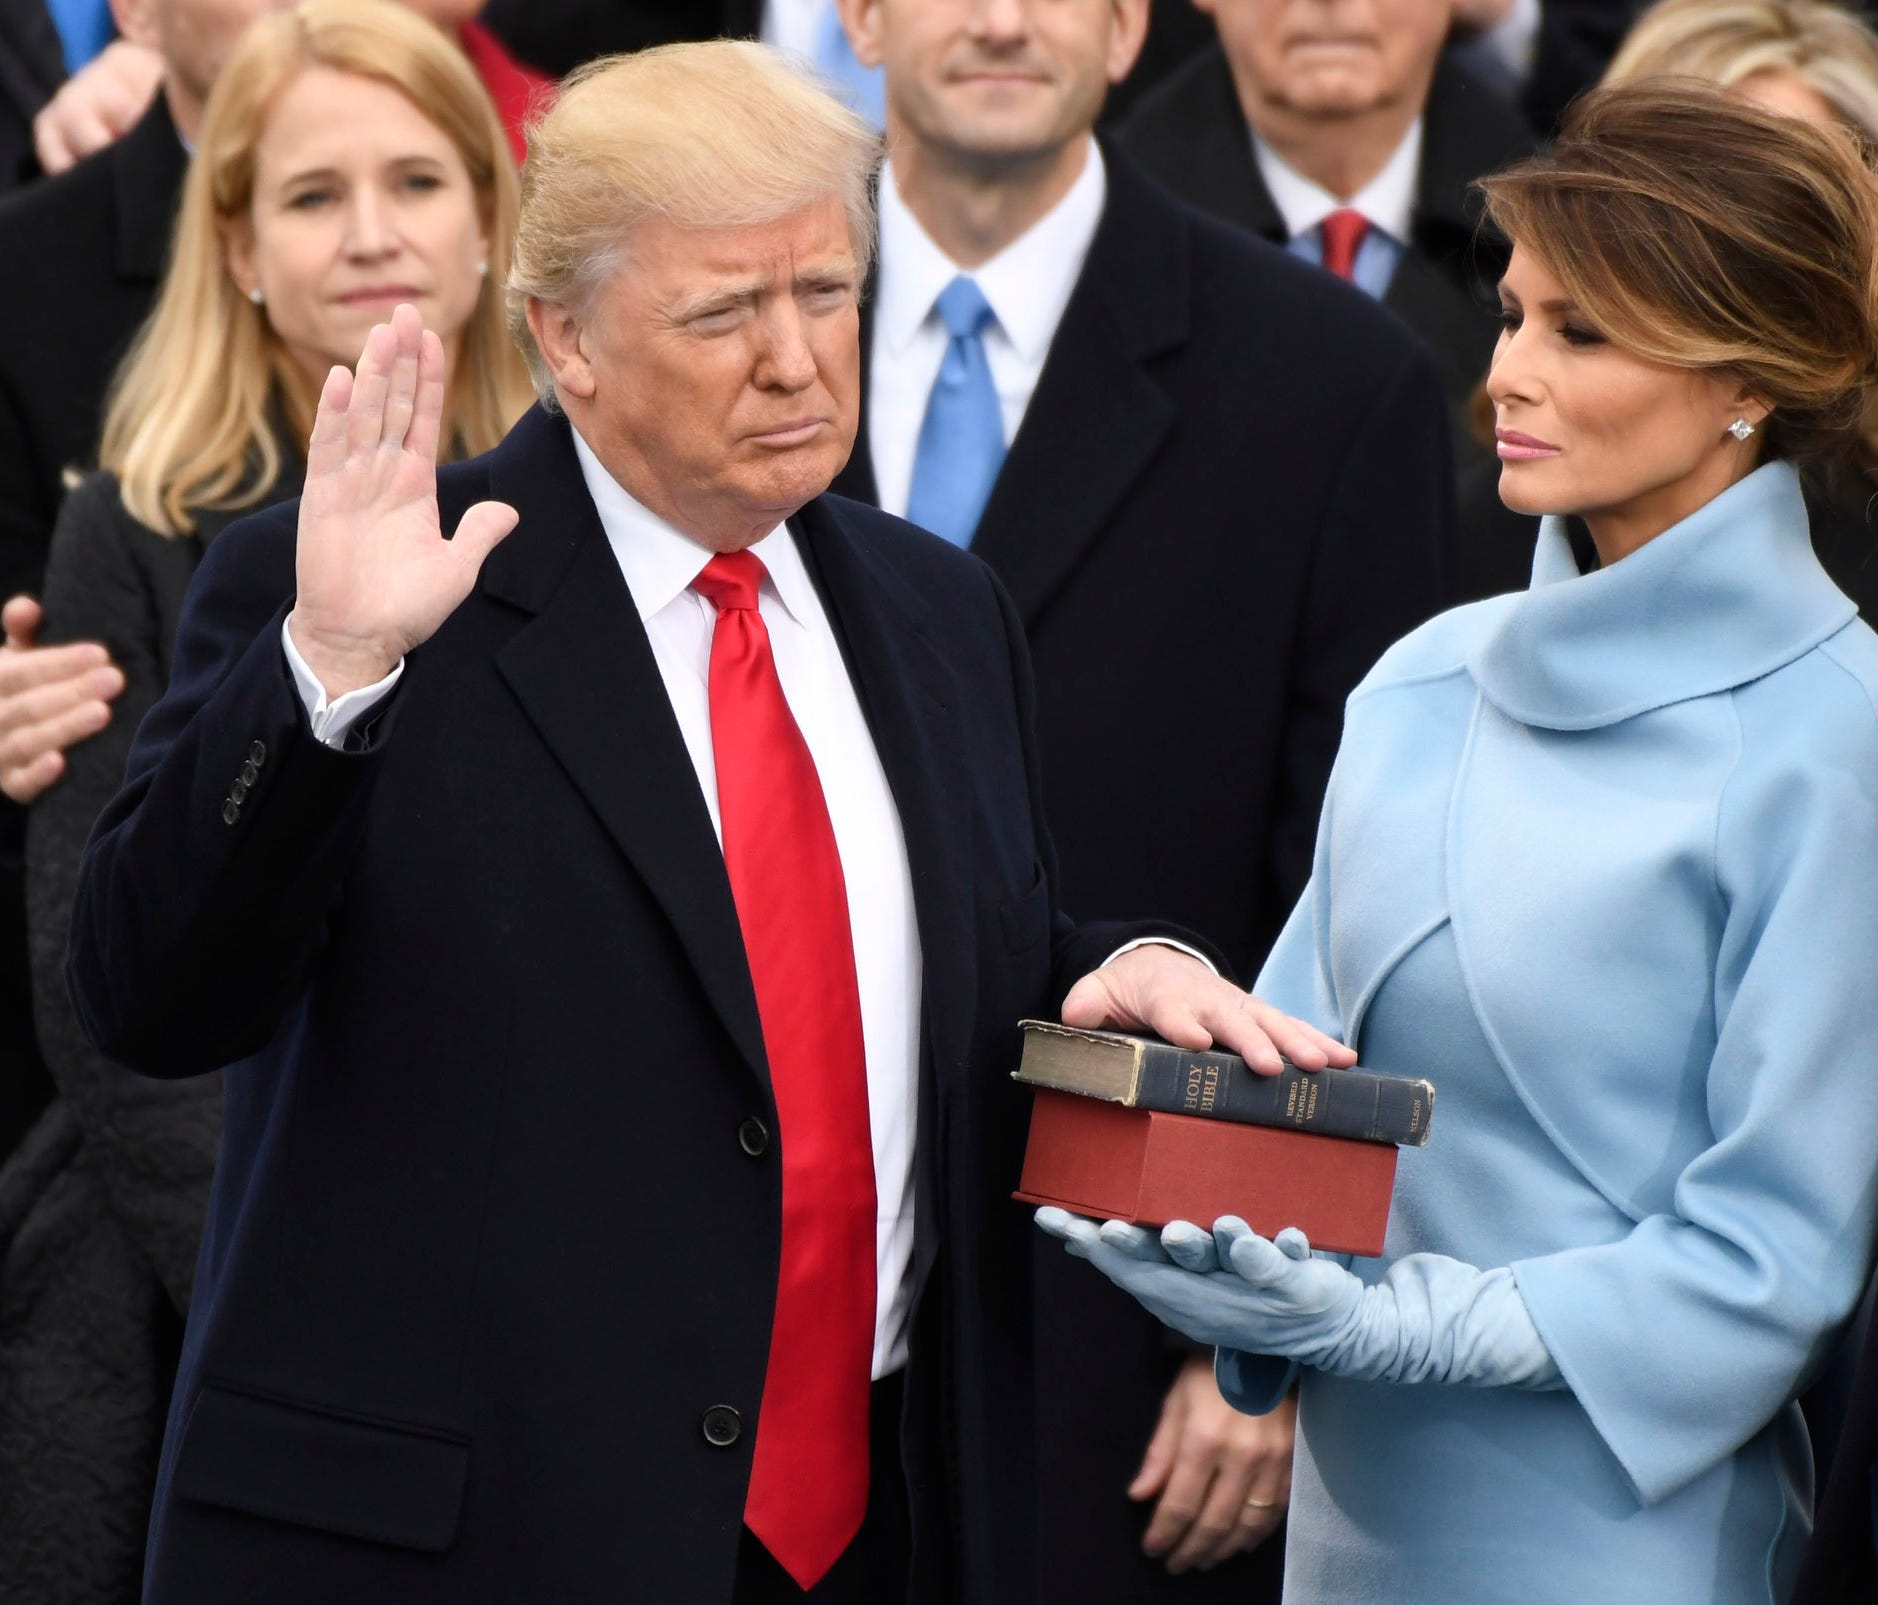 Some 30.6 million people watched Donald Trump's Inauguration on Friday.